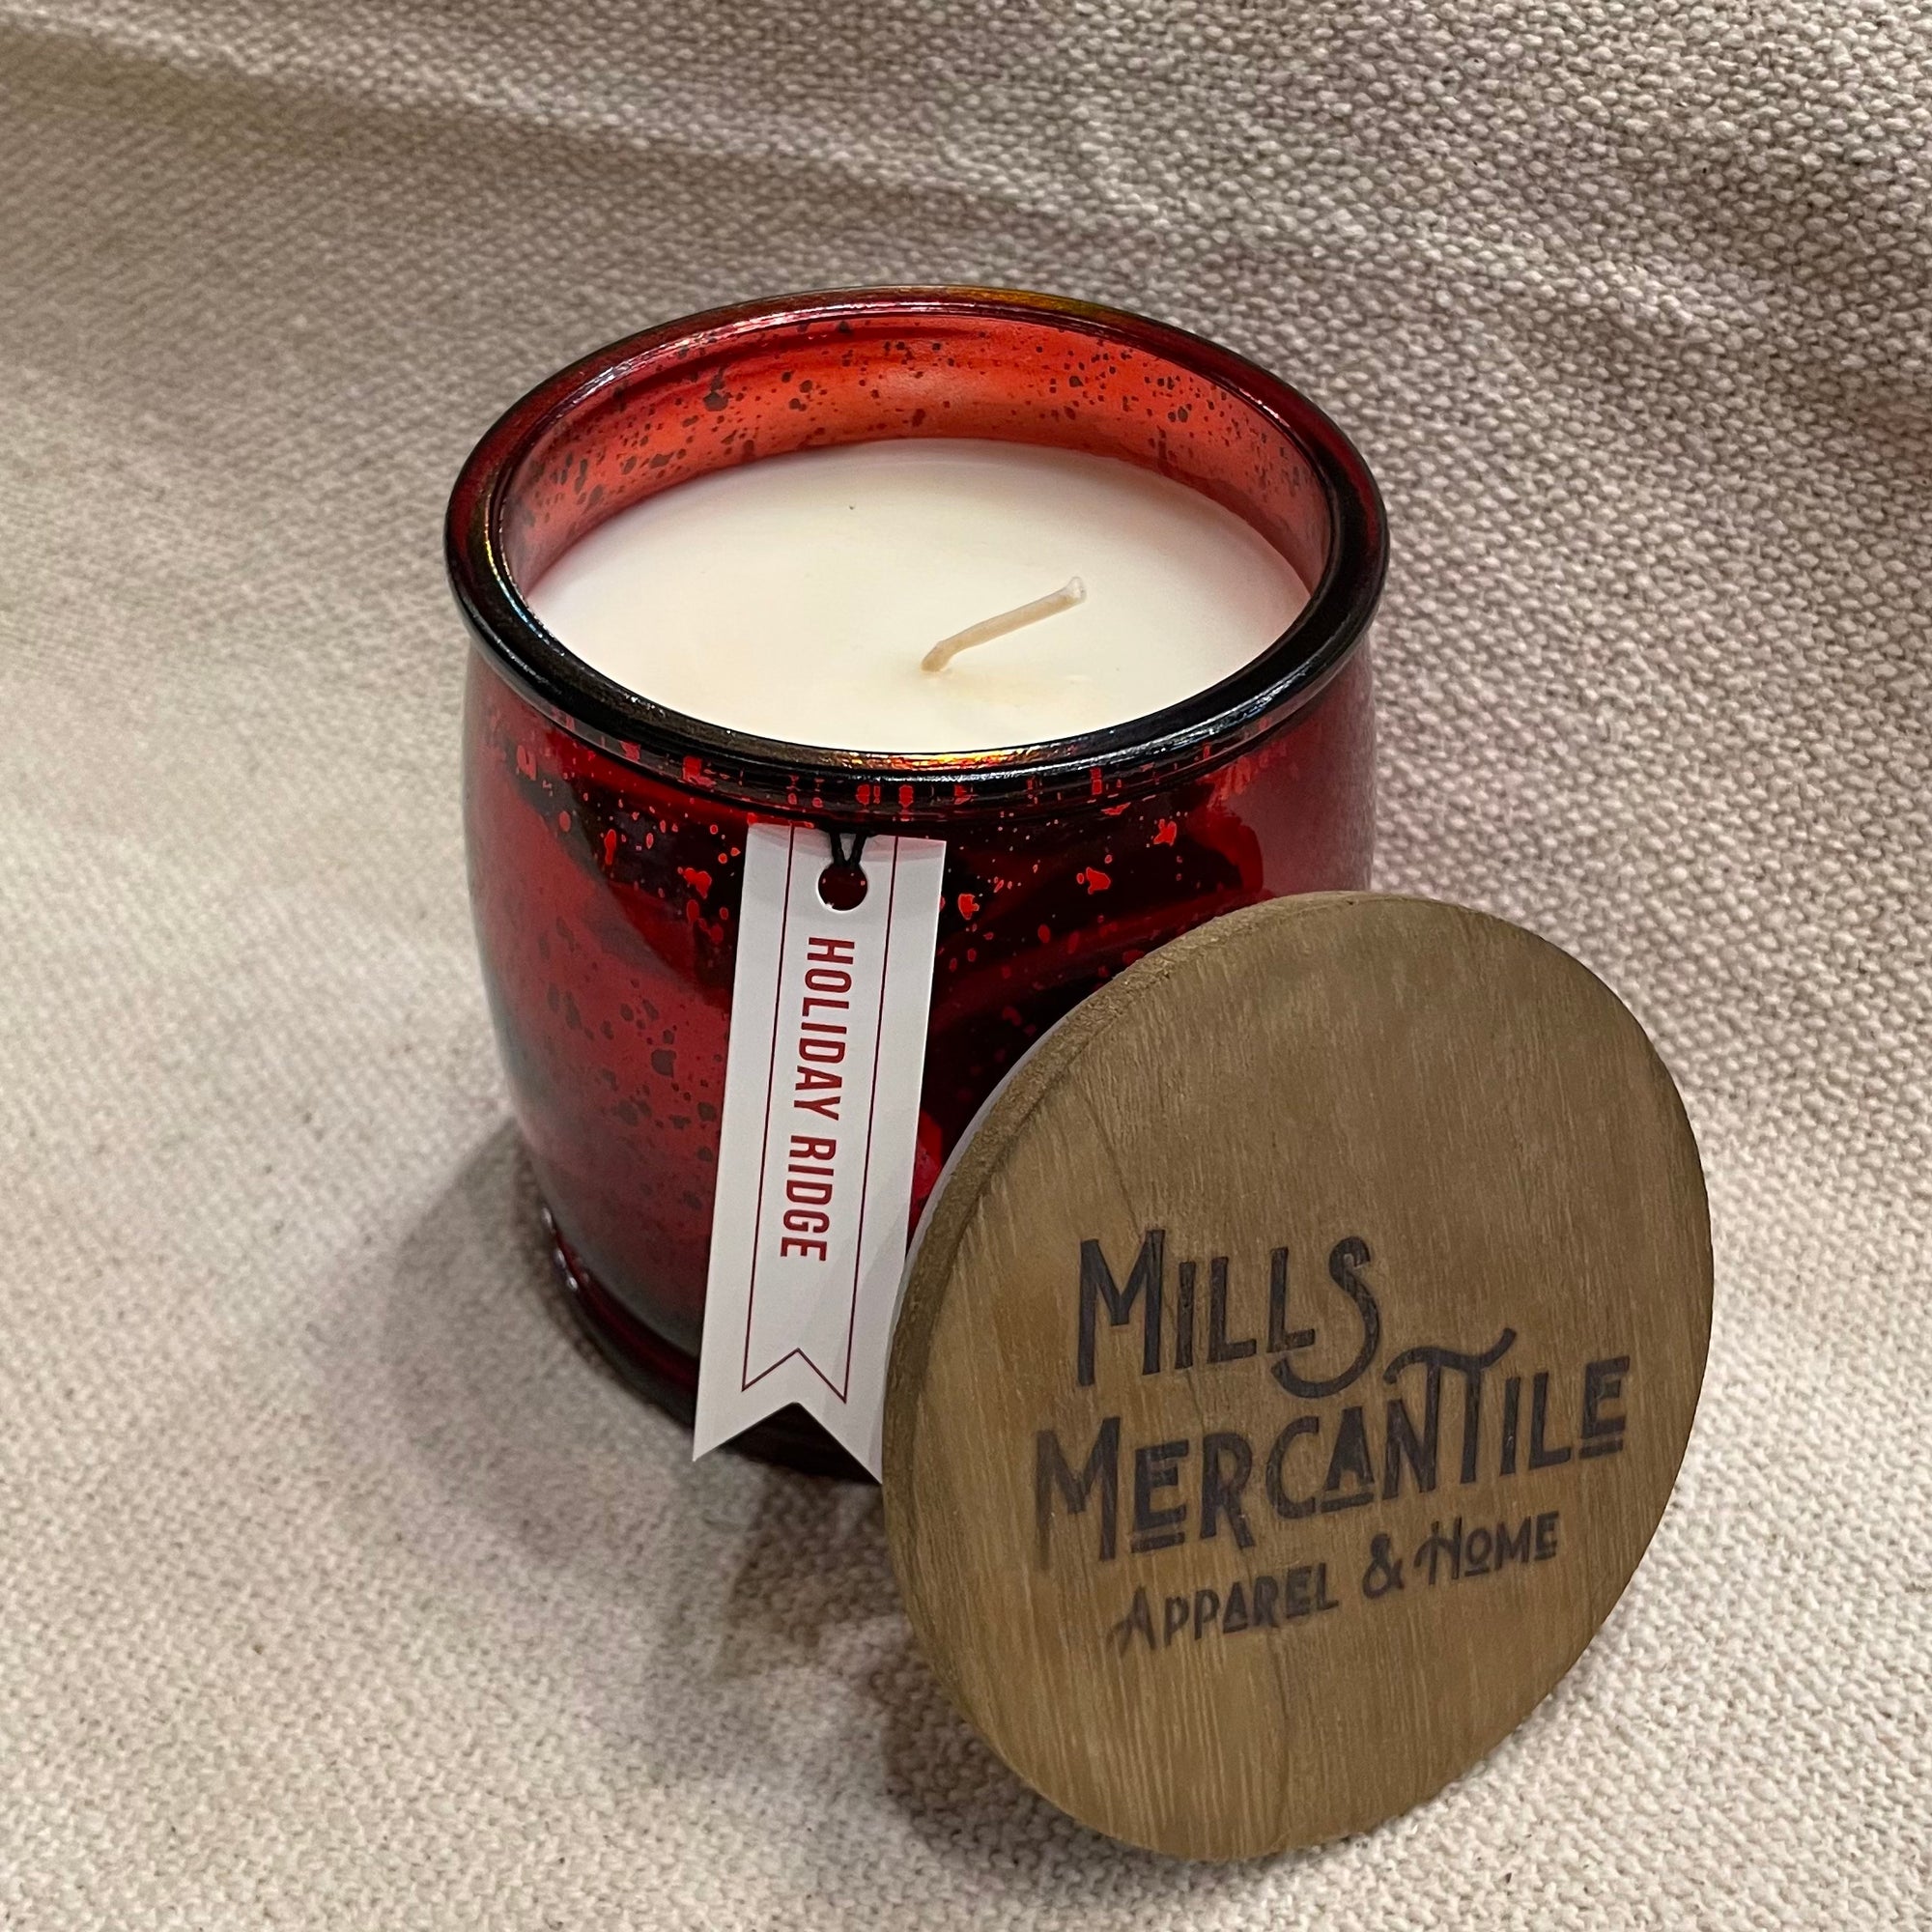 Mills Mercantile Candle - Holiday Ridge Scent